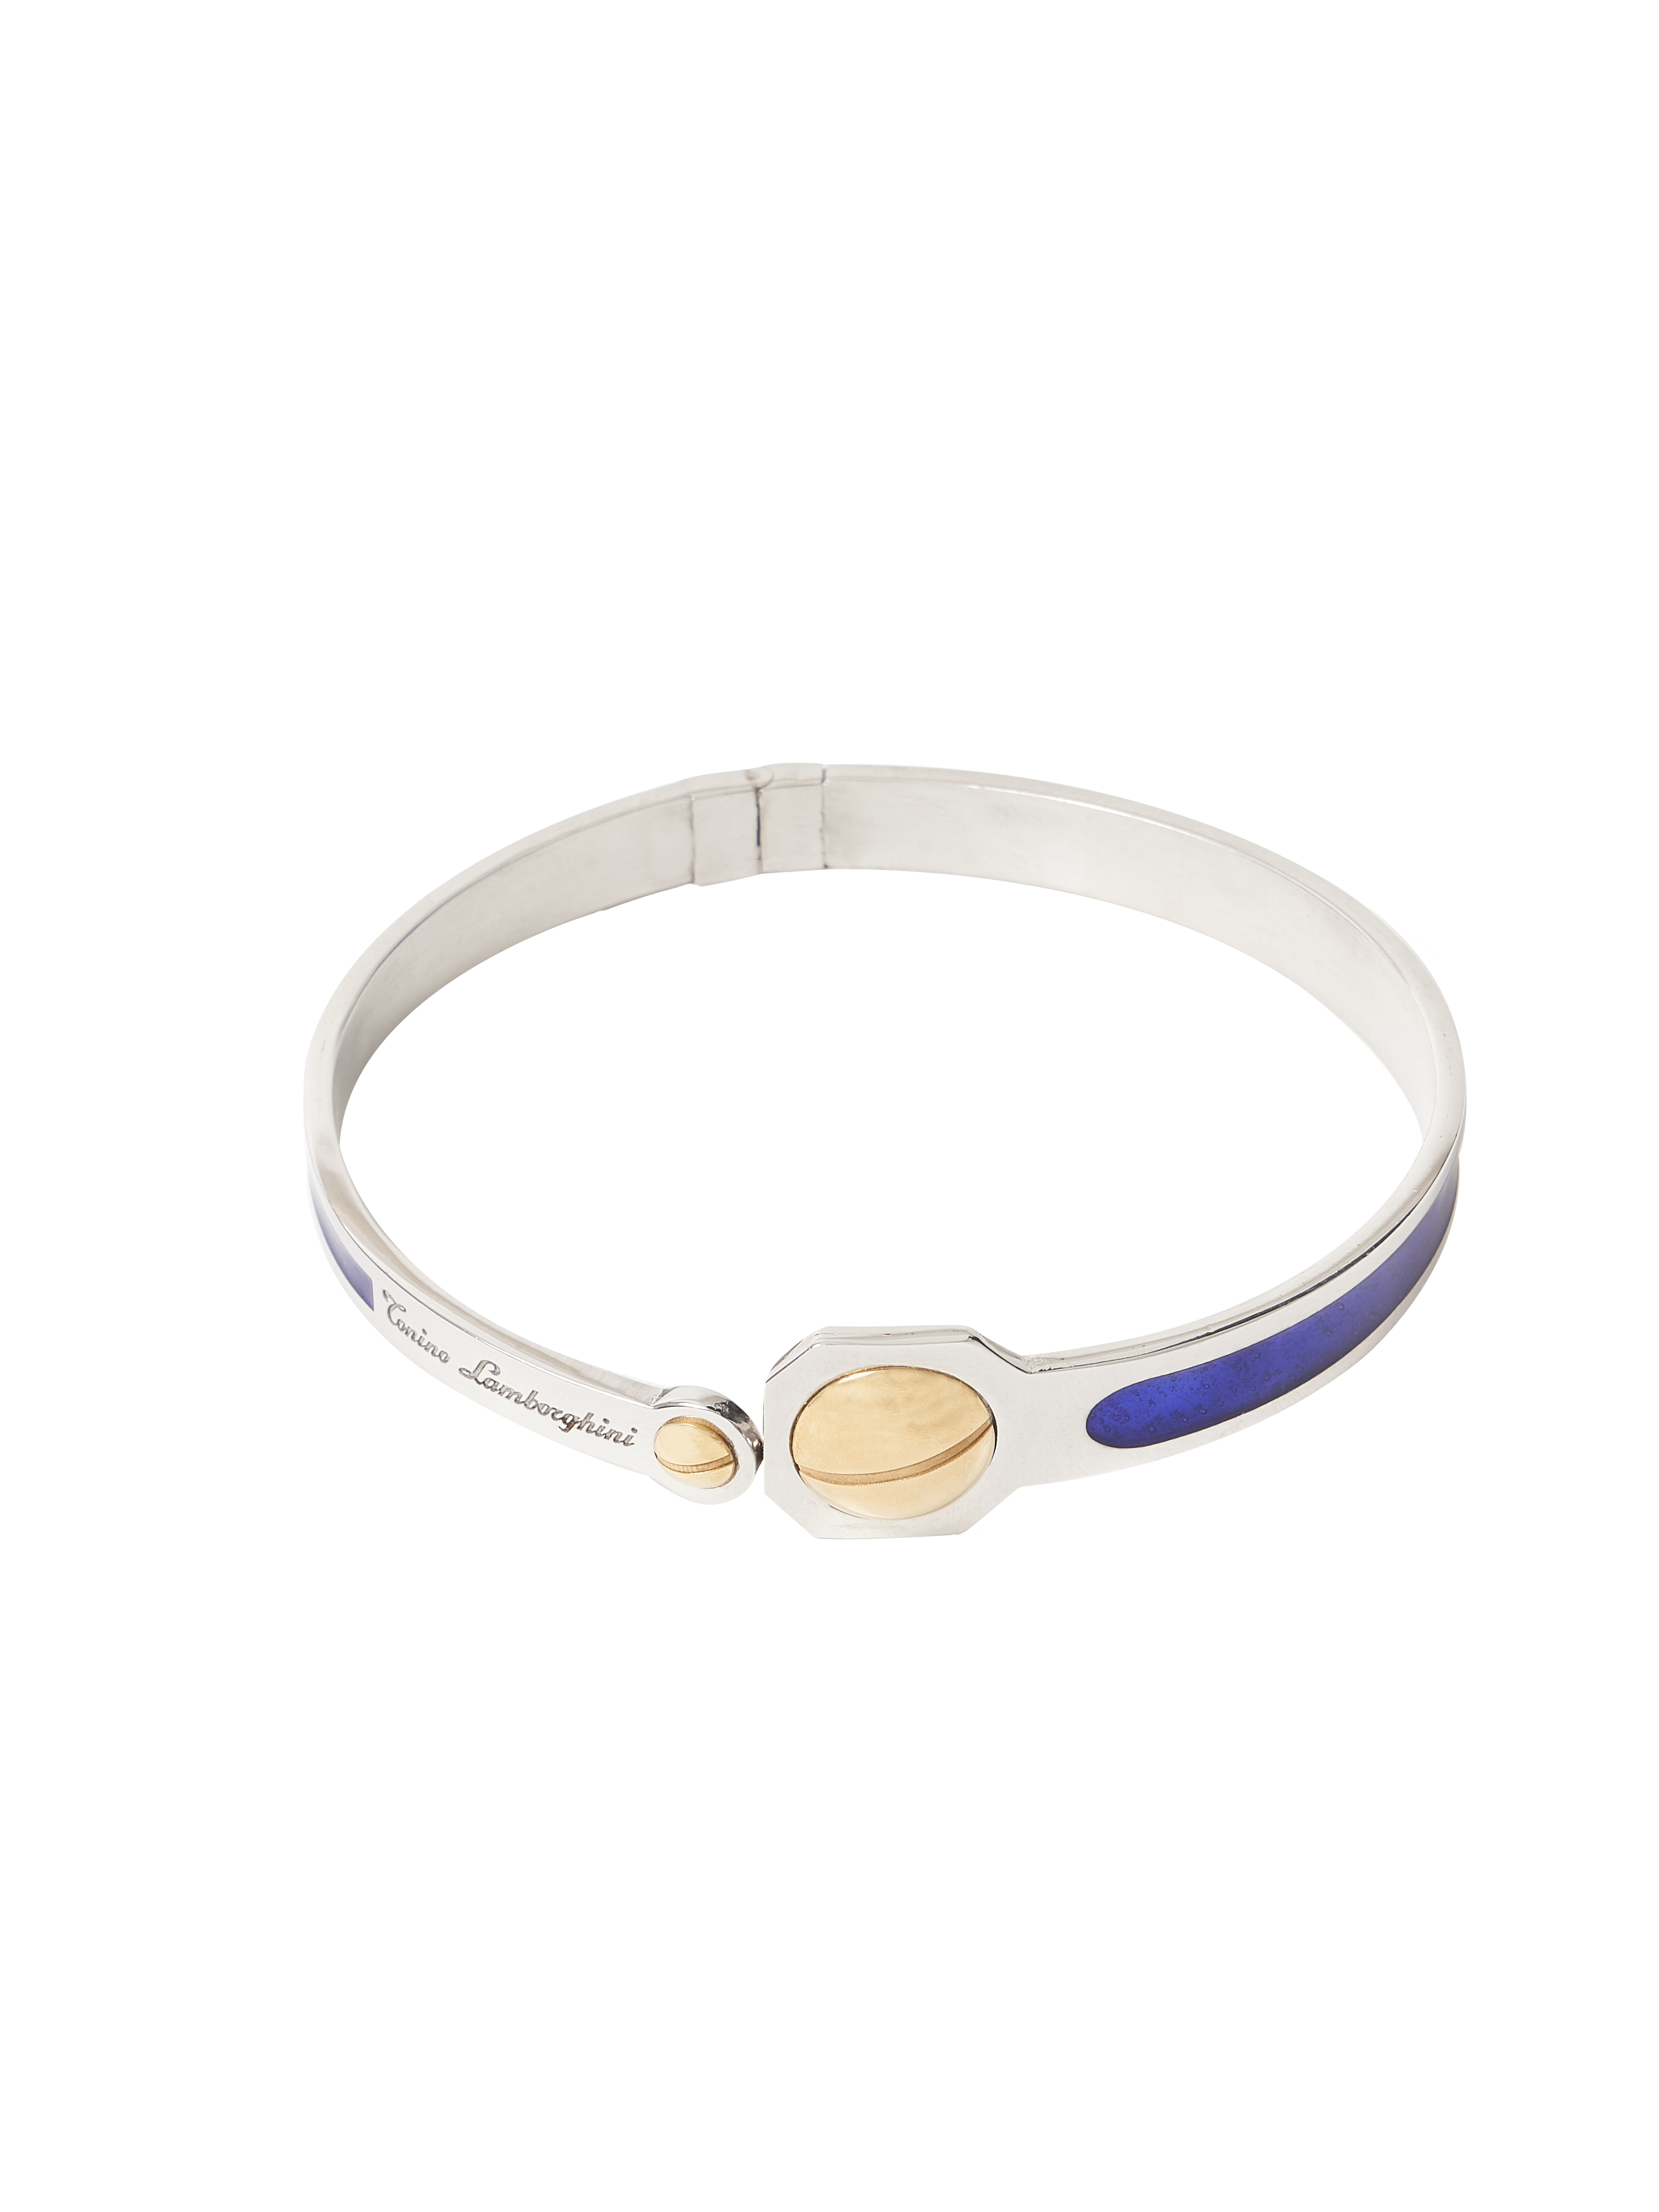 Bangle With Yellow Bolt - 6 cm